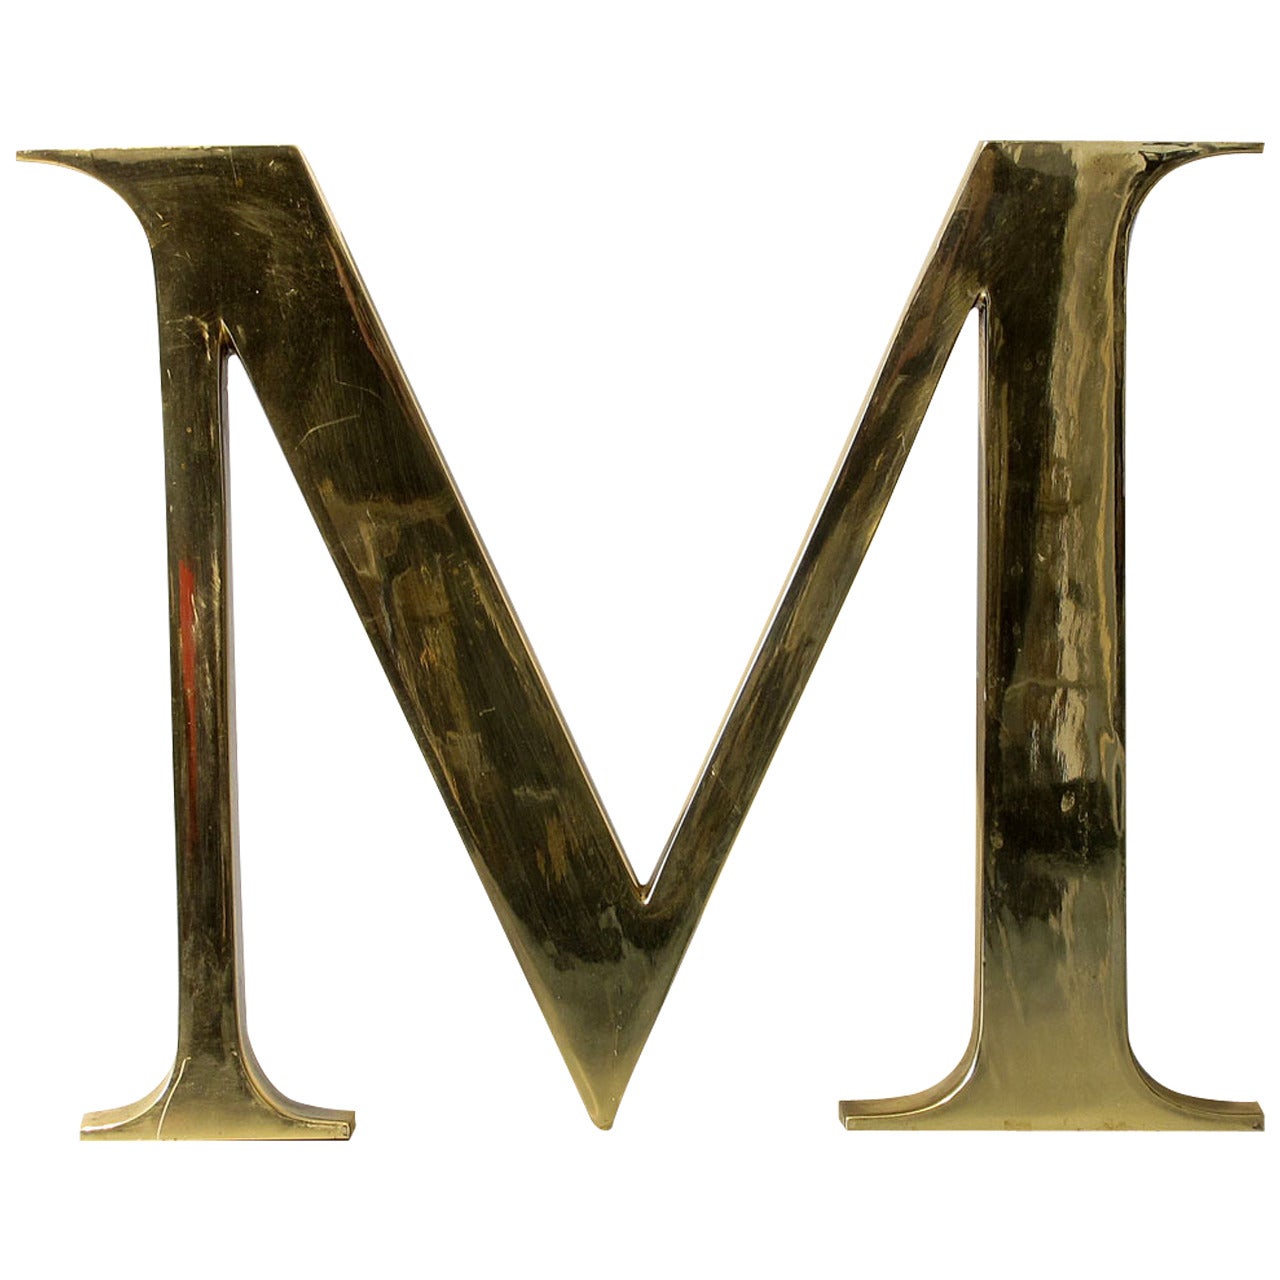 Solid Brass Letter "M"